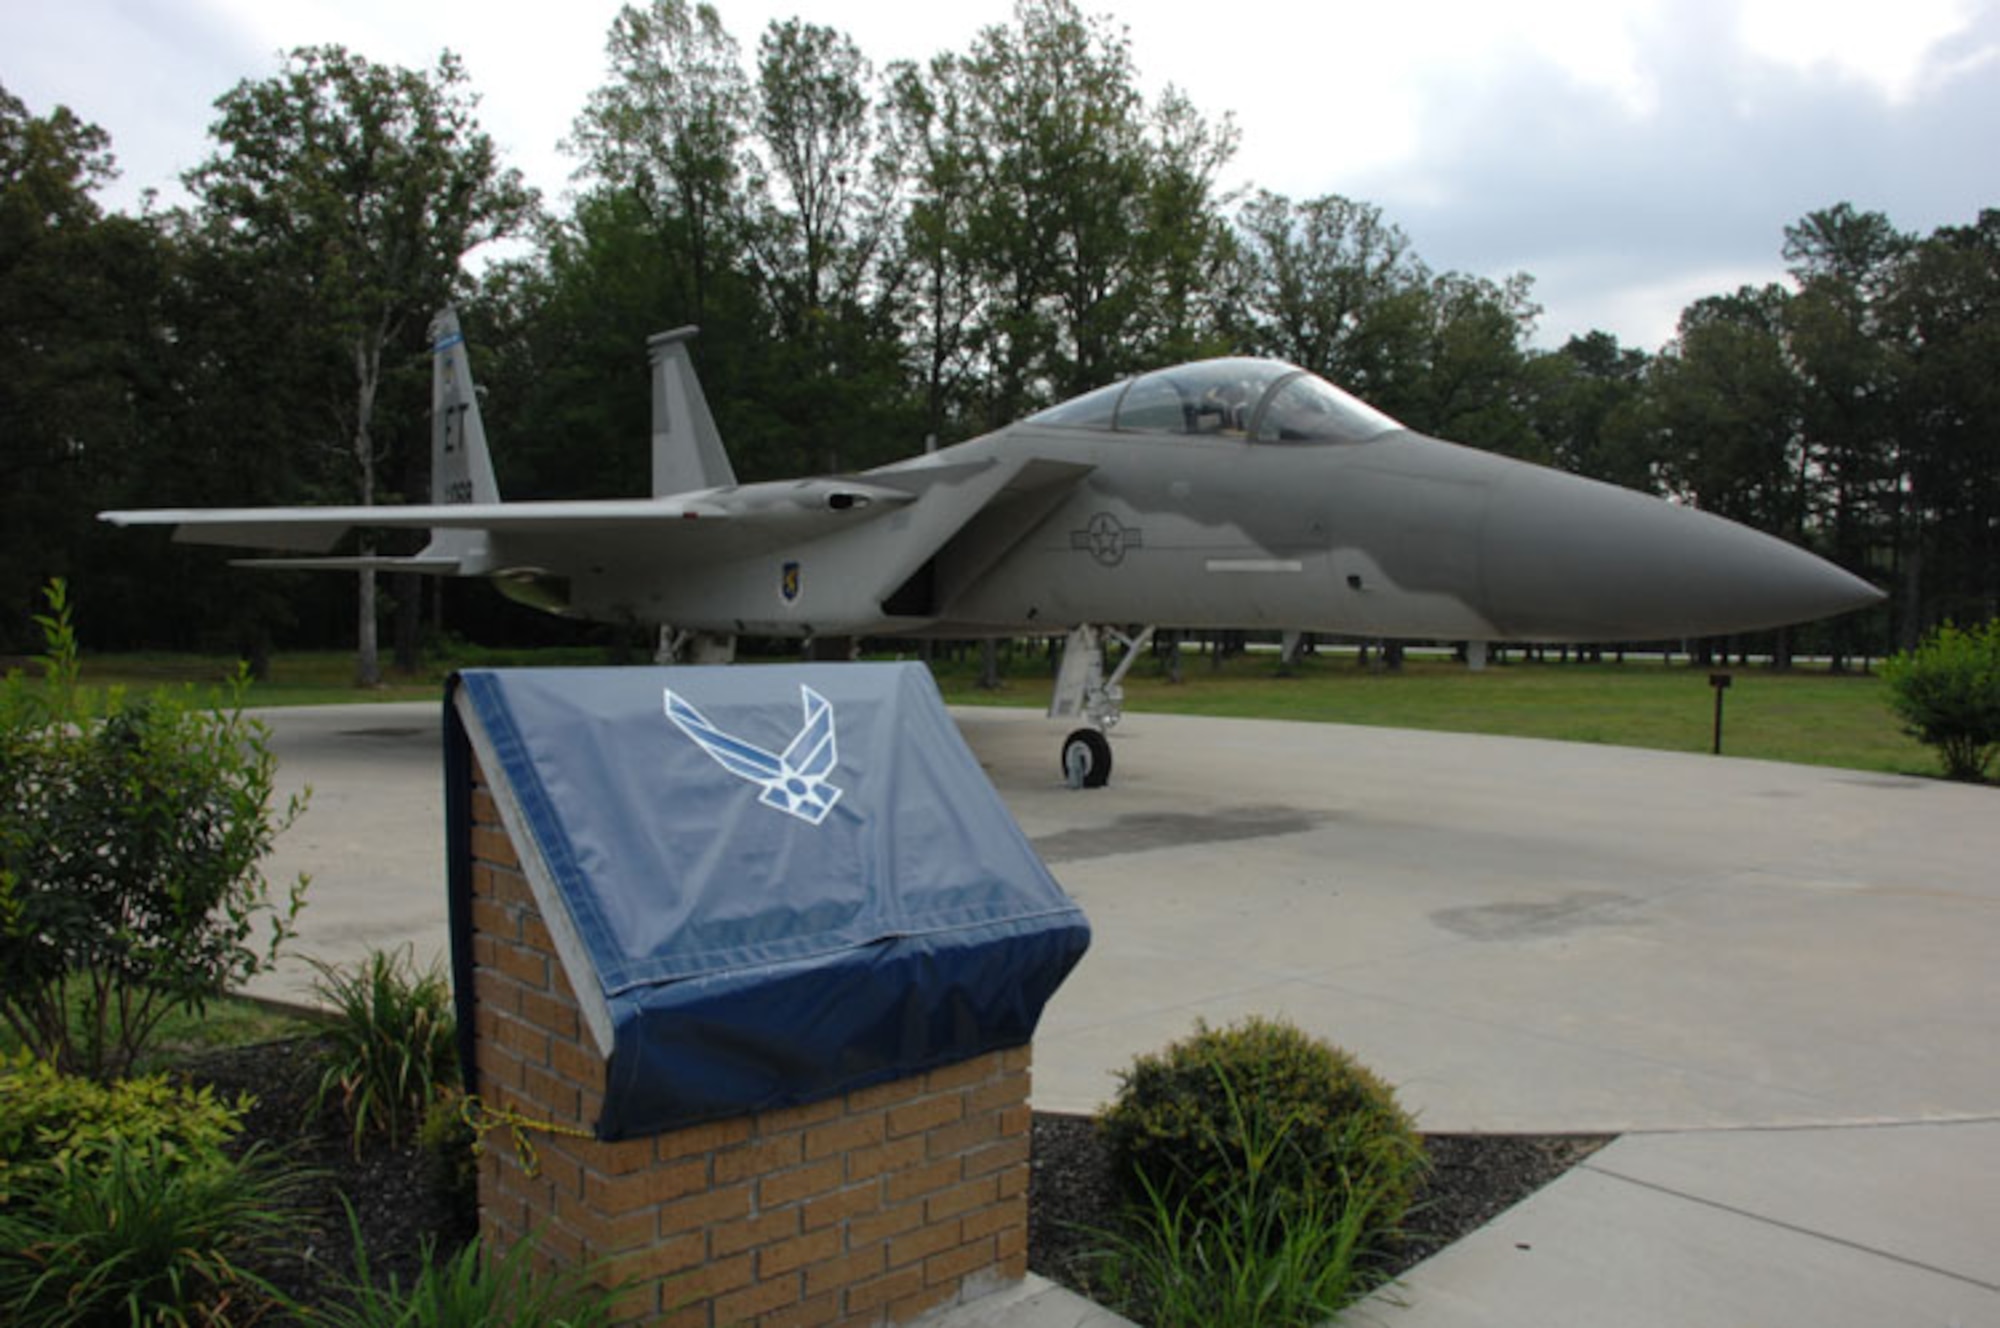 The F-15 static display aircraft at Arnold Air Force Base's Main Gate will be dedicated Aug. 9 in honor of Maj. Jim Duricy who was killed when he was forced to eject at high speed as the F-15 he piloted crashed into the Gulf of Mexico April 30, 2002. He was assigned to the 40th Flight Test Squadron, Eglin Air Force Base, Fla. (Photo by David Housch)